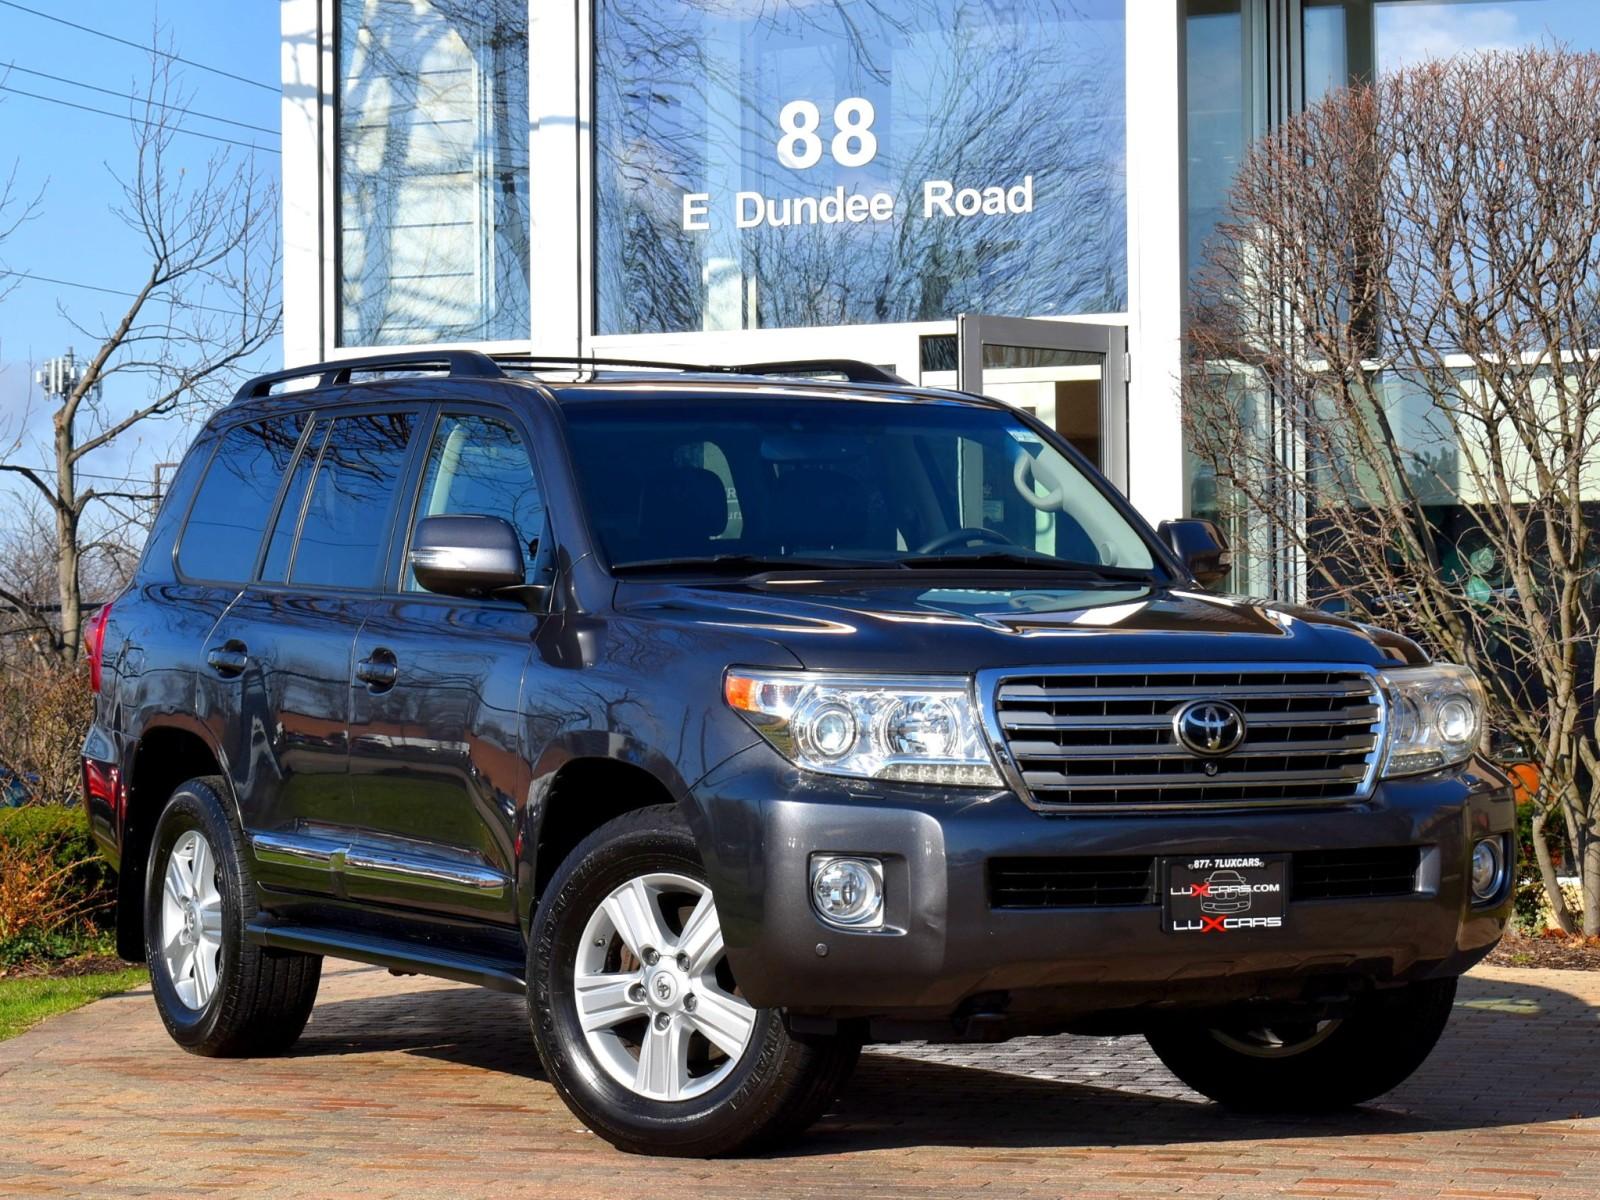 Used 2014 Toyota Land Cruiser Nav Rear DVD 4WD MSRP $80,474 For Sale (Sold)  | Lux Cars Chicago Stock #8341